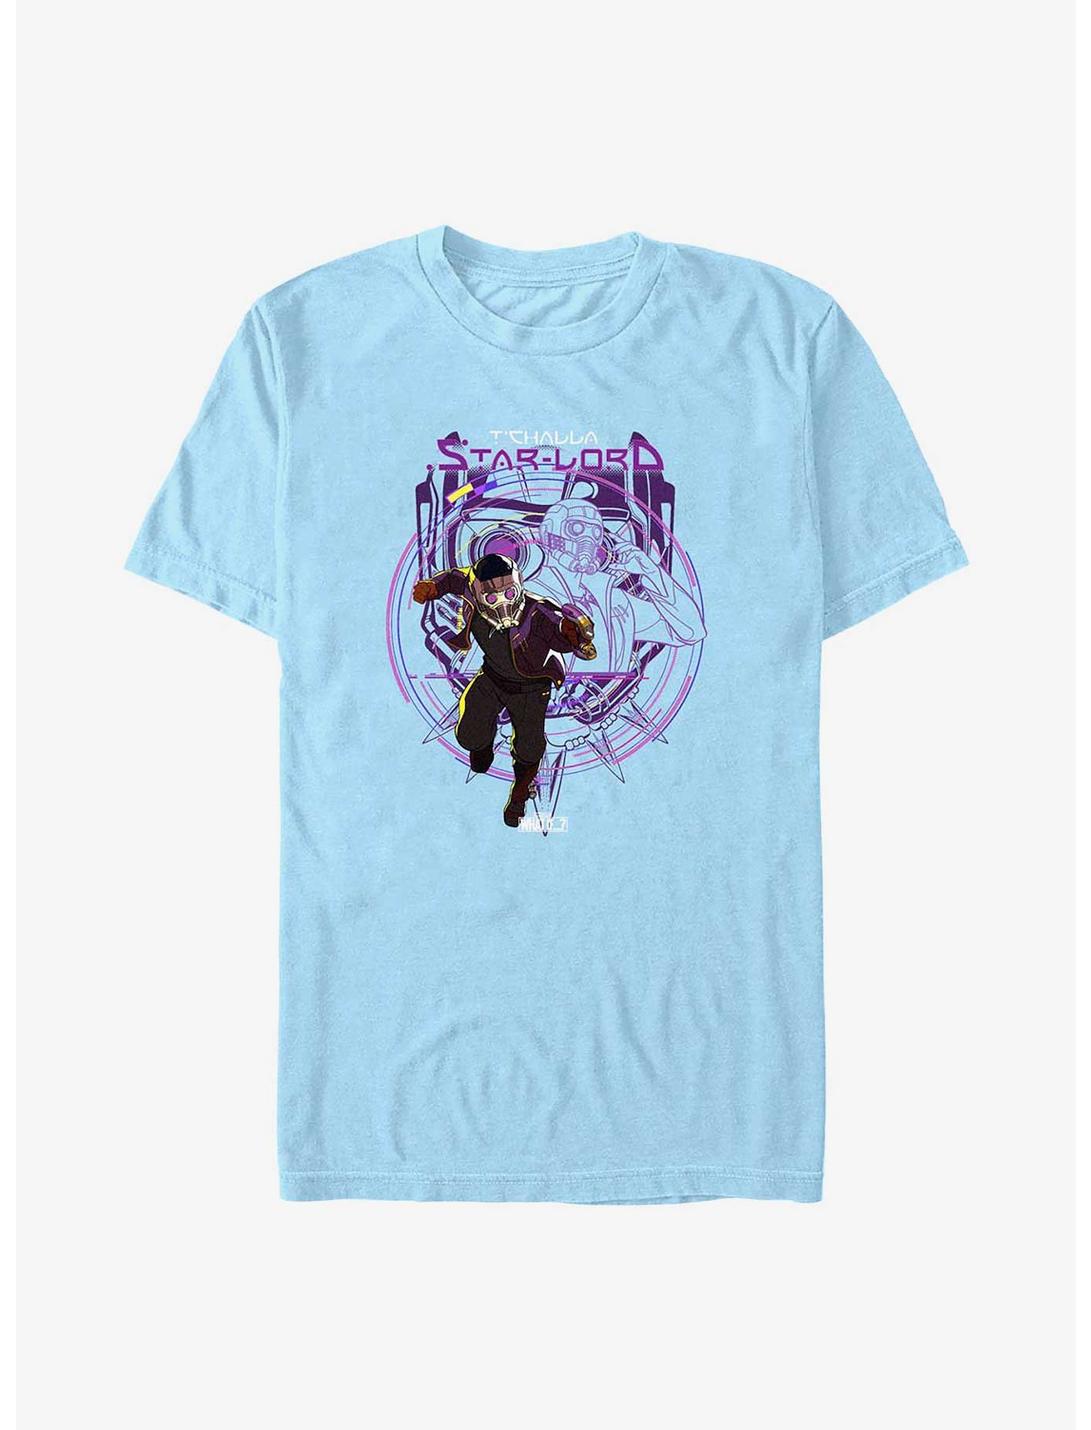 Marvel What If...? T'Challa Star-Lord T-Shirt, LT BLUE, hi-res